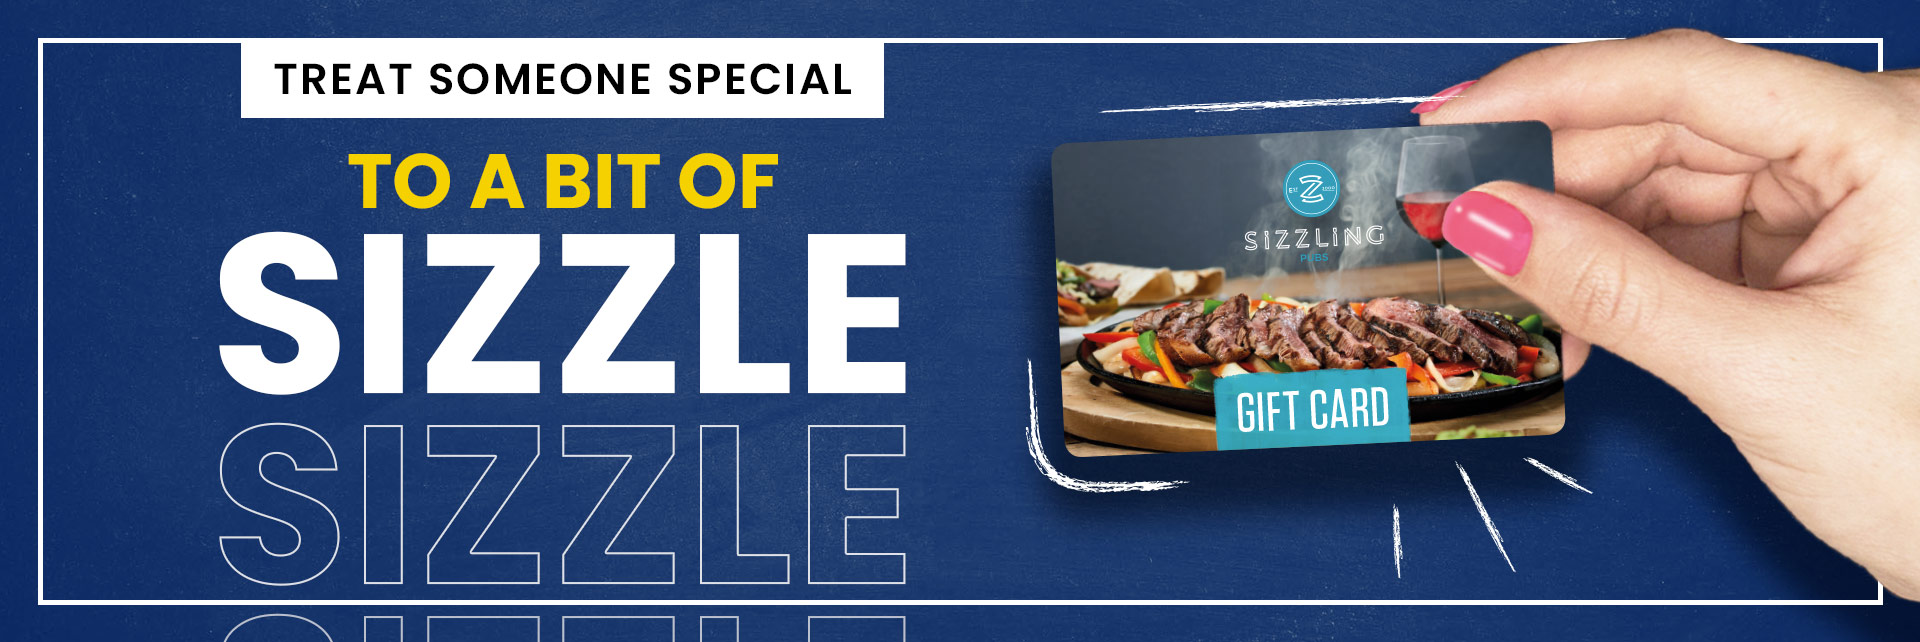 Sizzling Pubs Gift Card at The Mere Park in Blackpool